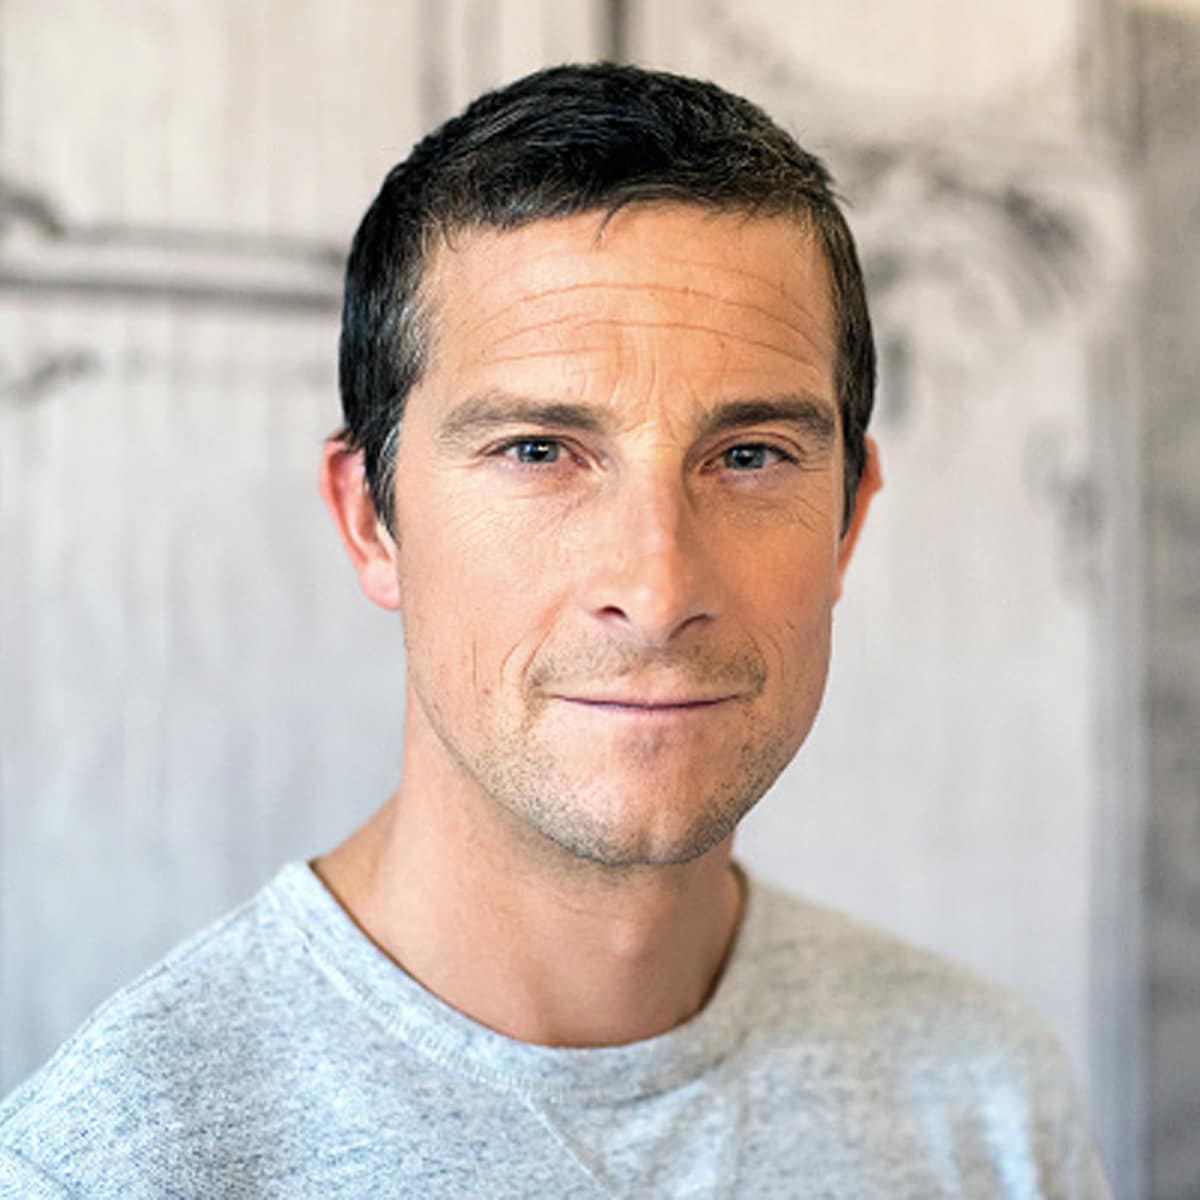 Bear Grylls attends the AOL Build Speaker Series to discuss the television series "Running Wild With Bear Grylls"